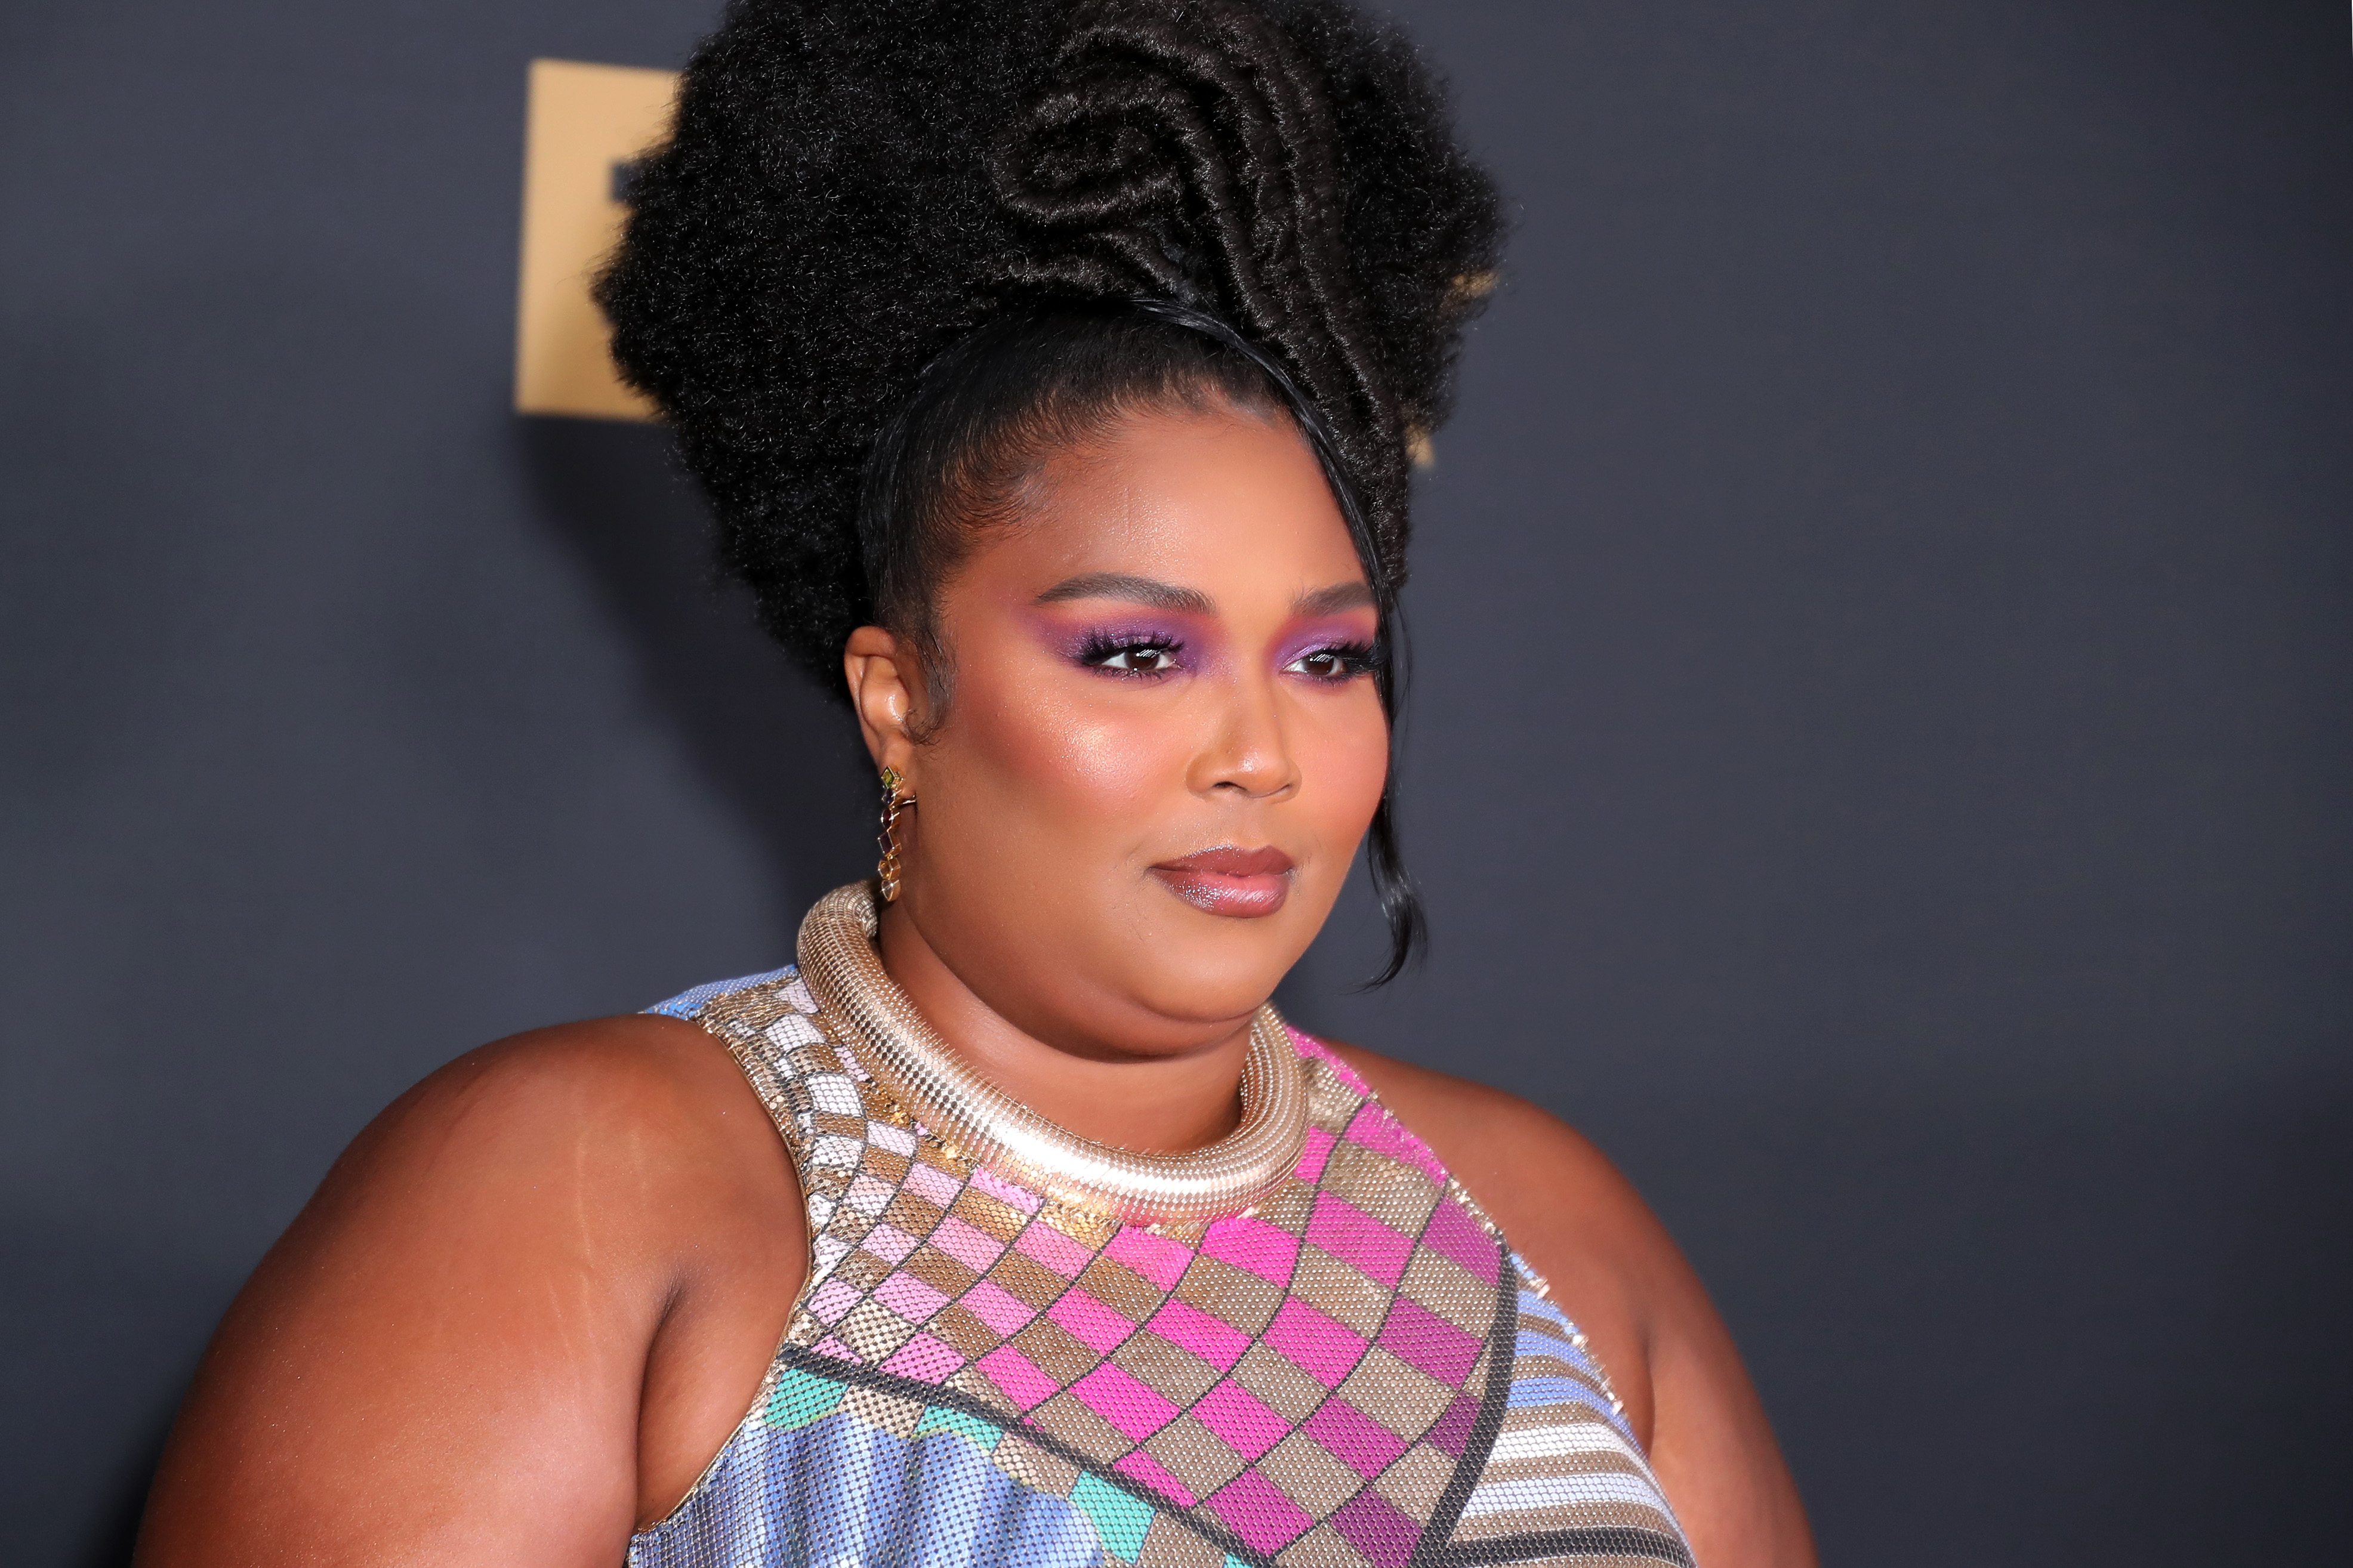 Lizzo Warns Fans Not To “Drink & DM” After Messaging Chris Evans